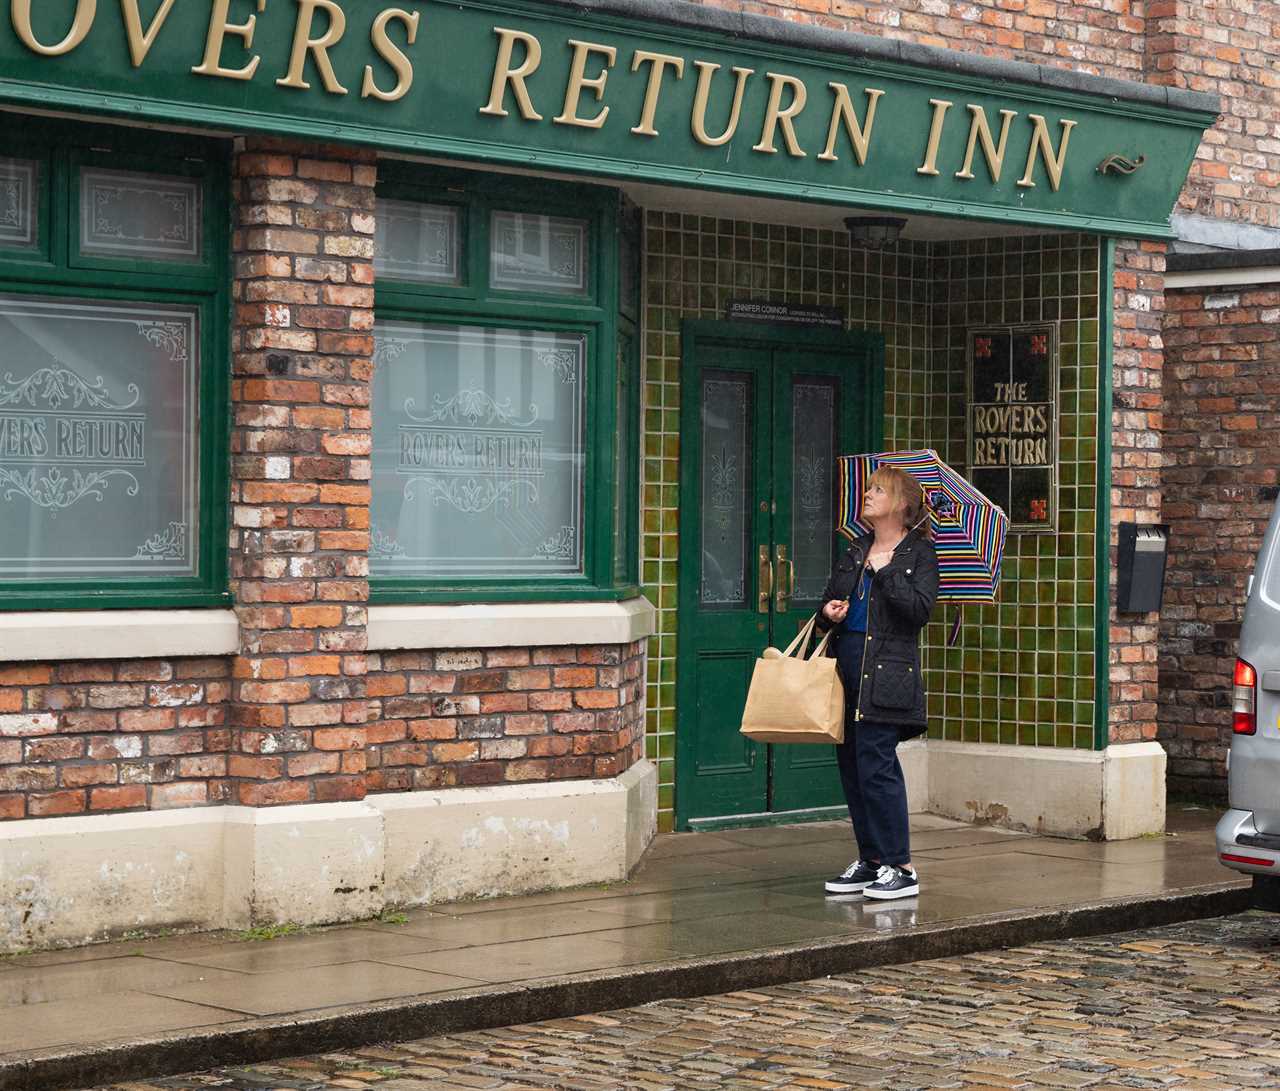 Coronation Street in Chaos: Rovers Return Pub Shut Down and Staff Sacked